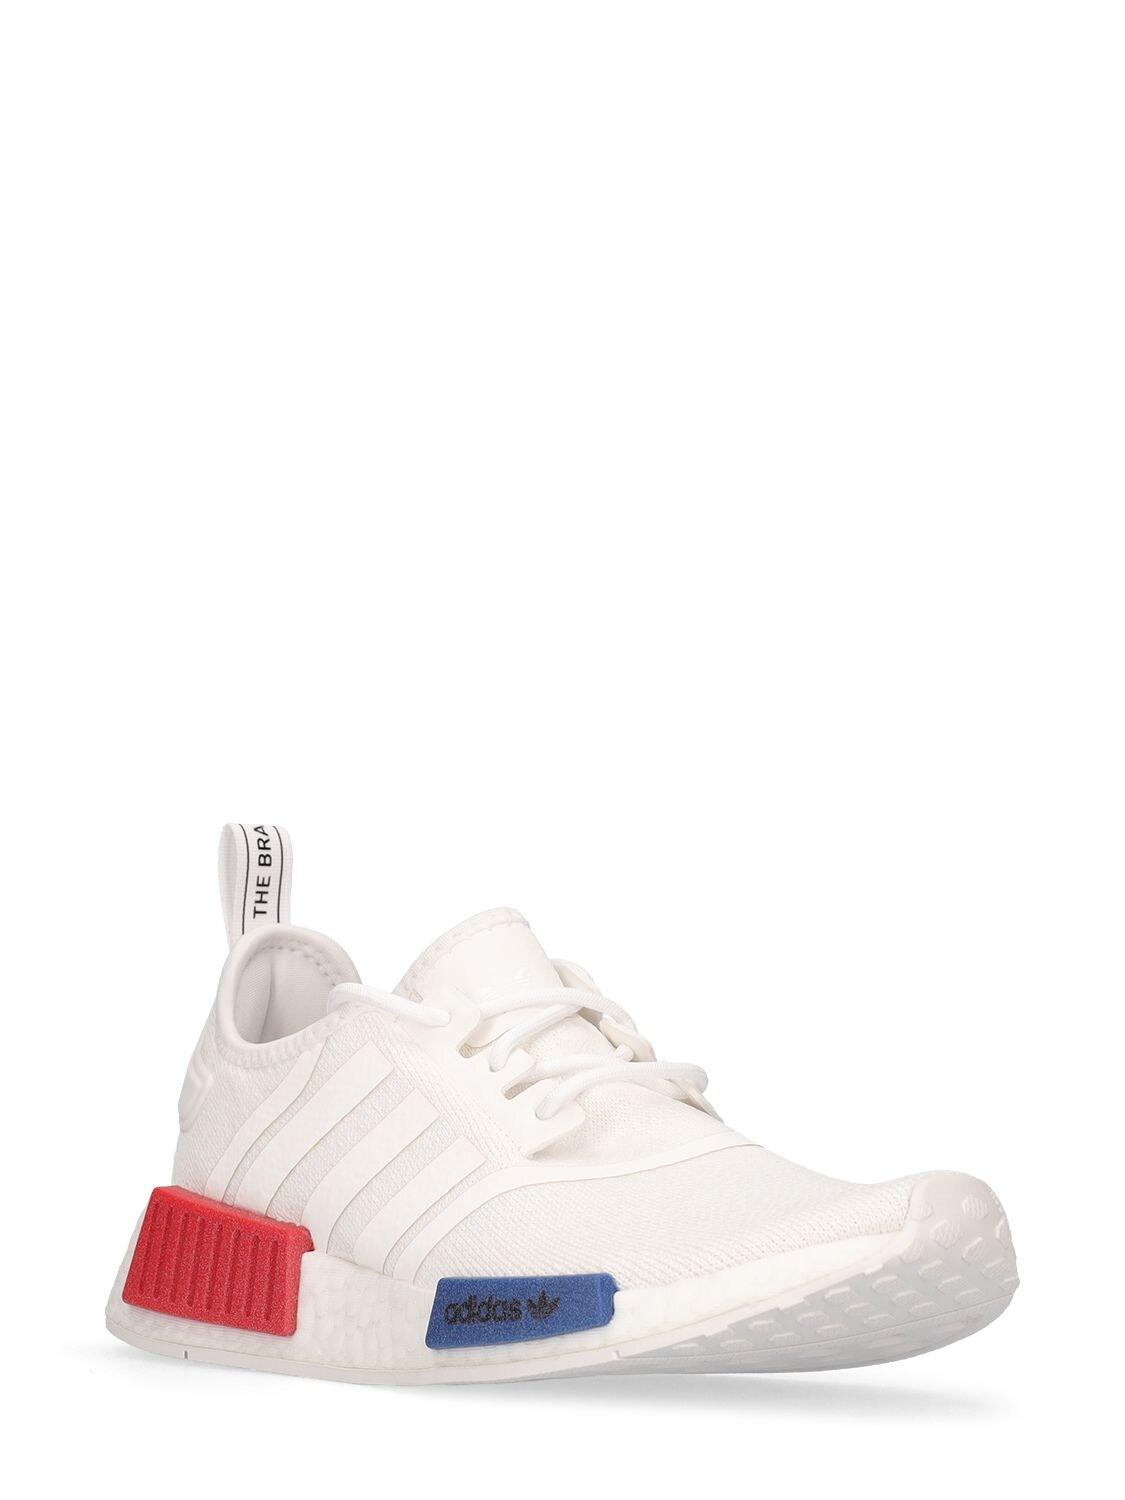 adidas Originals Synthetic Nmd_r1 Boost Sneakers in White | Lyst